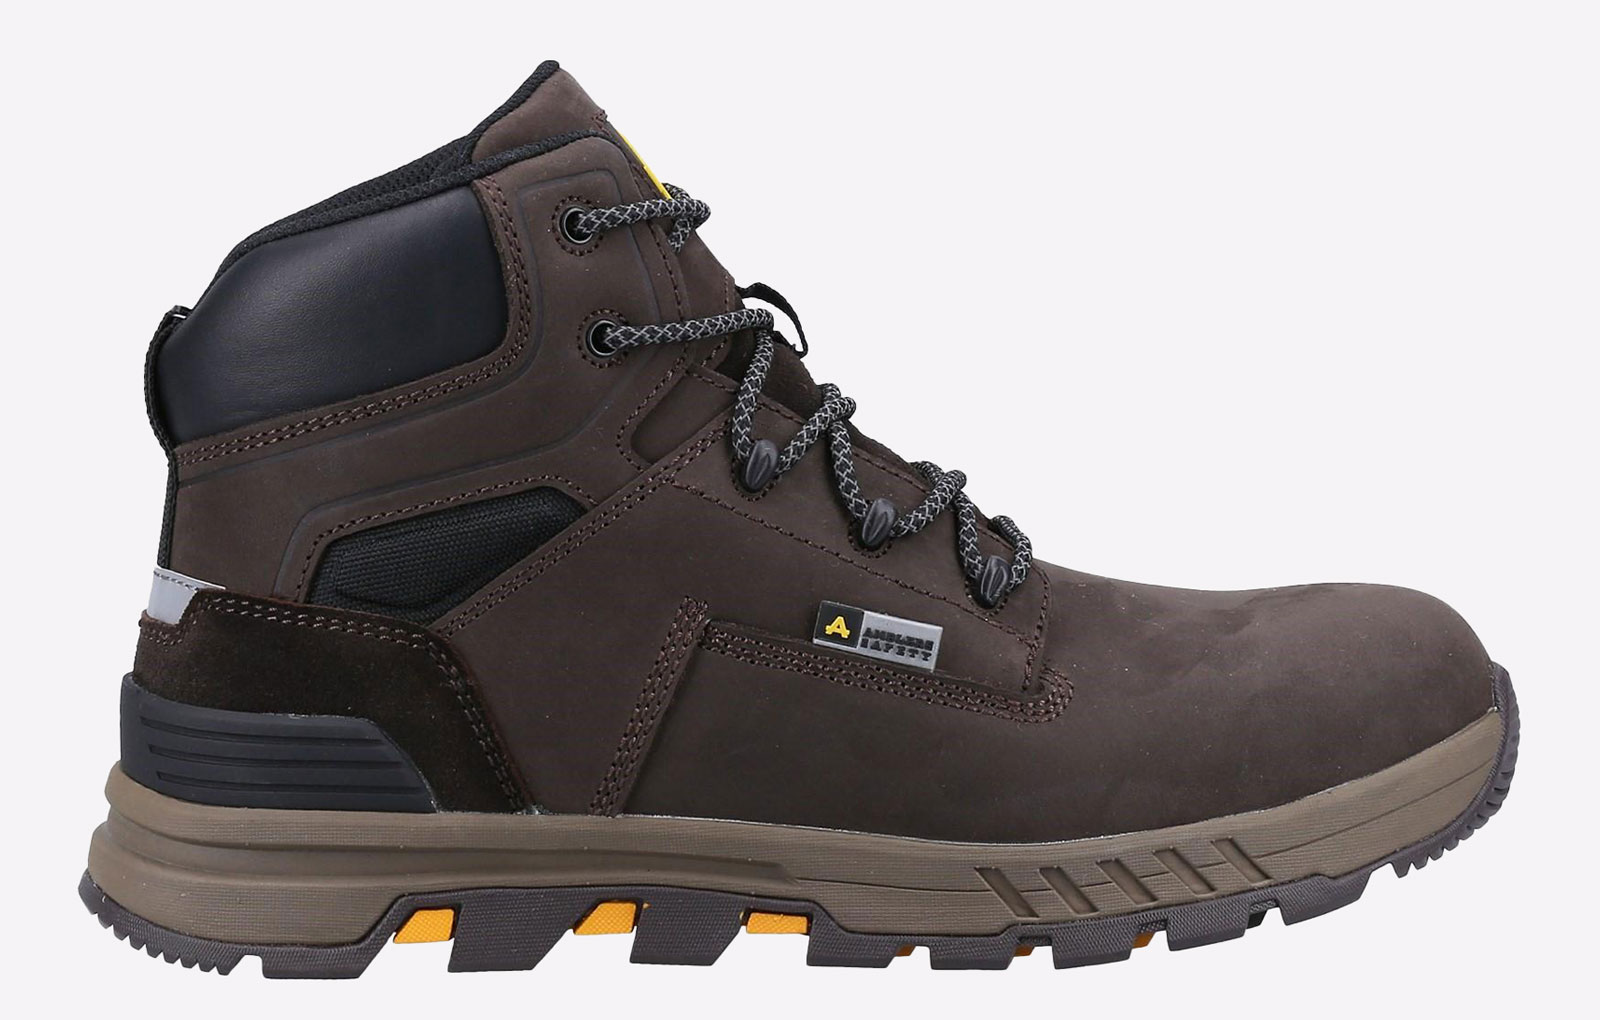 Amblers 261 Safety Boots Mens - GRD-37413-69767-13